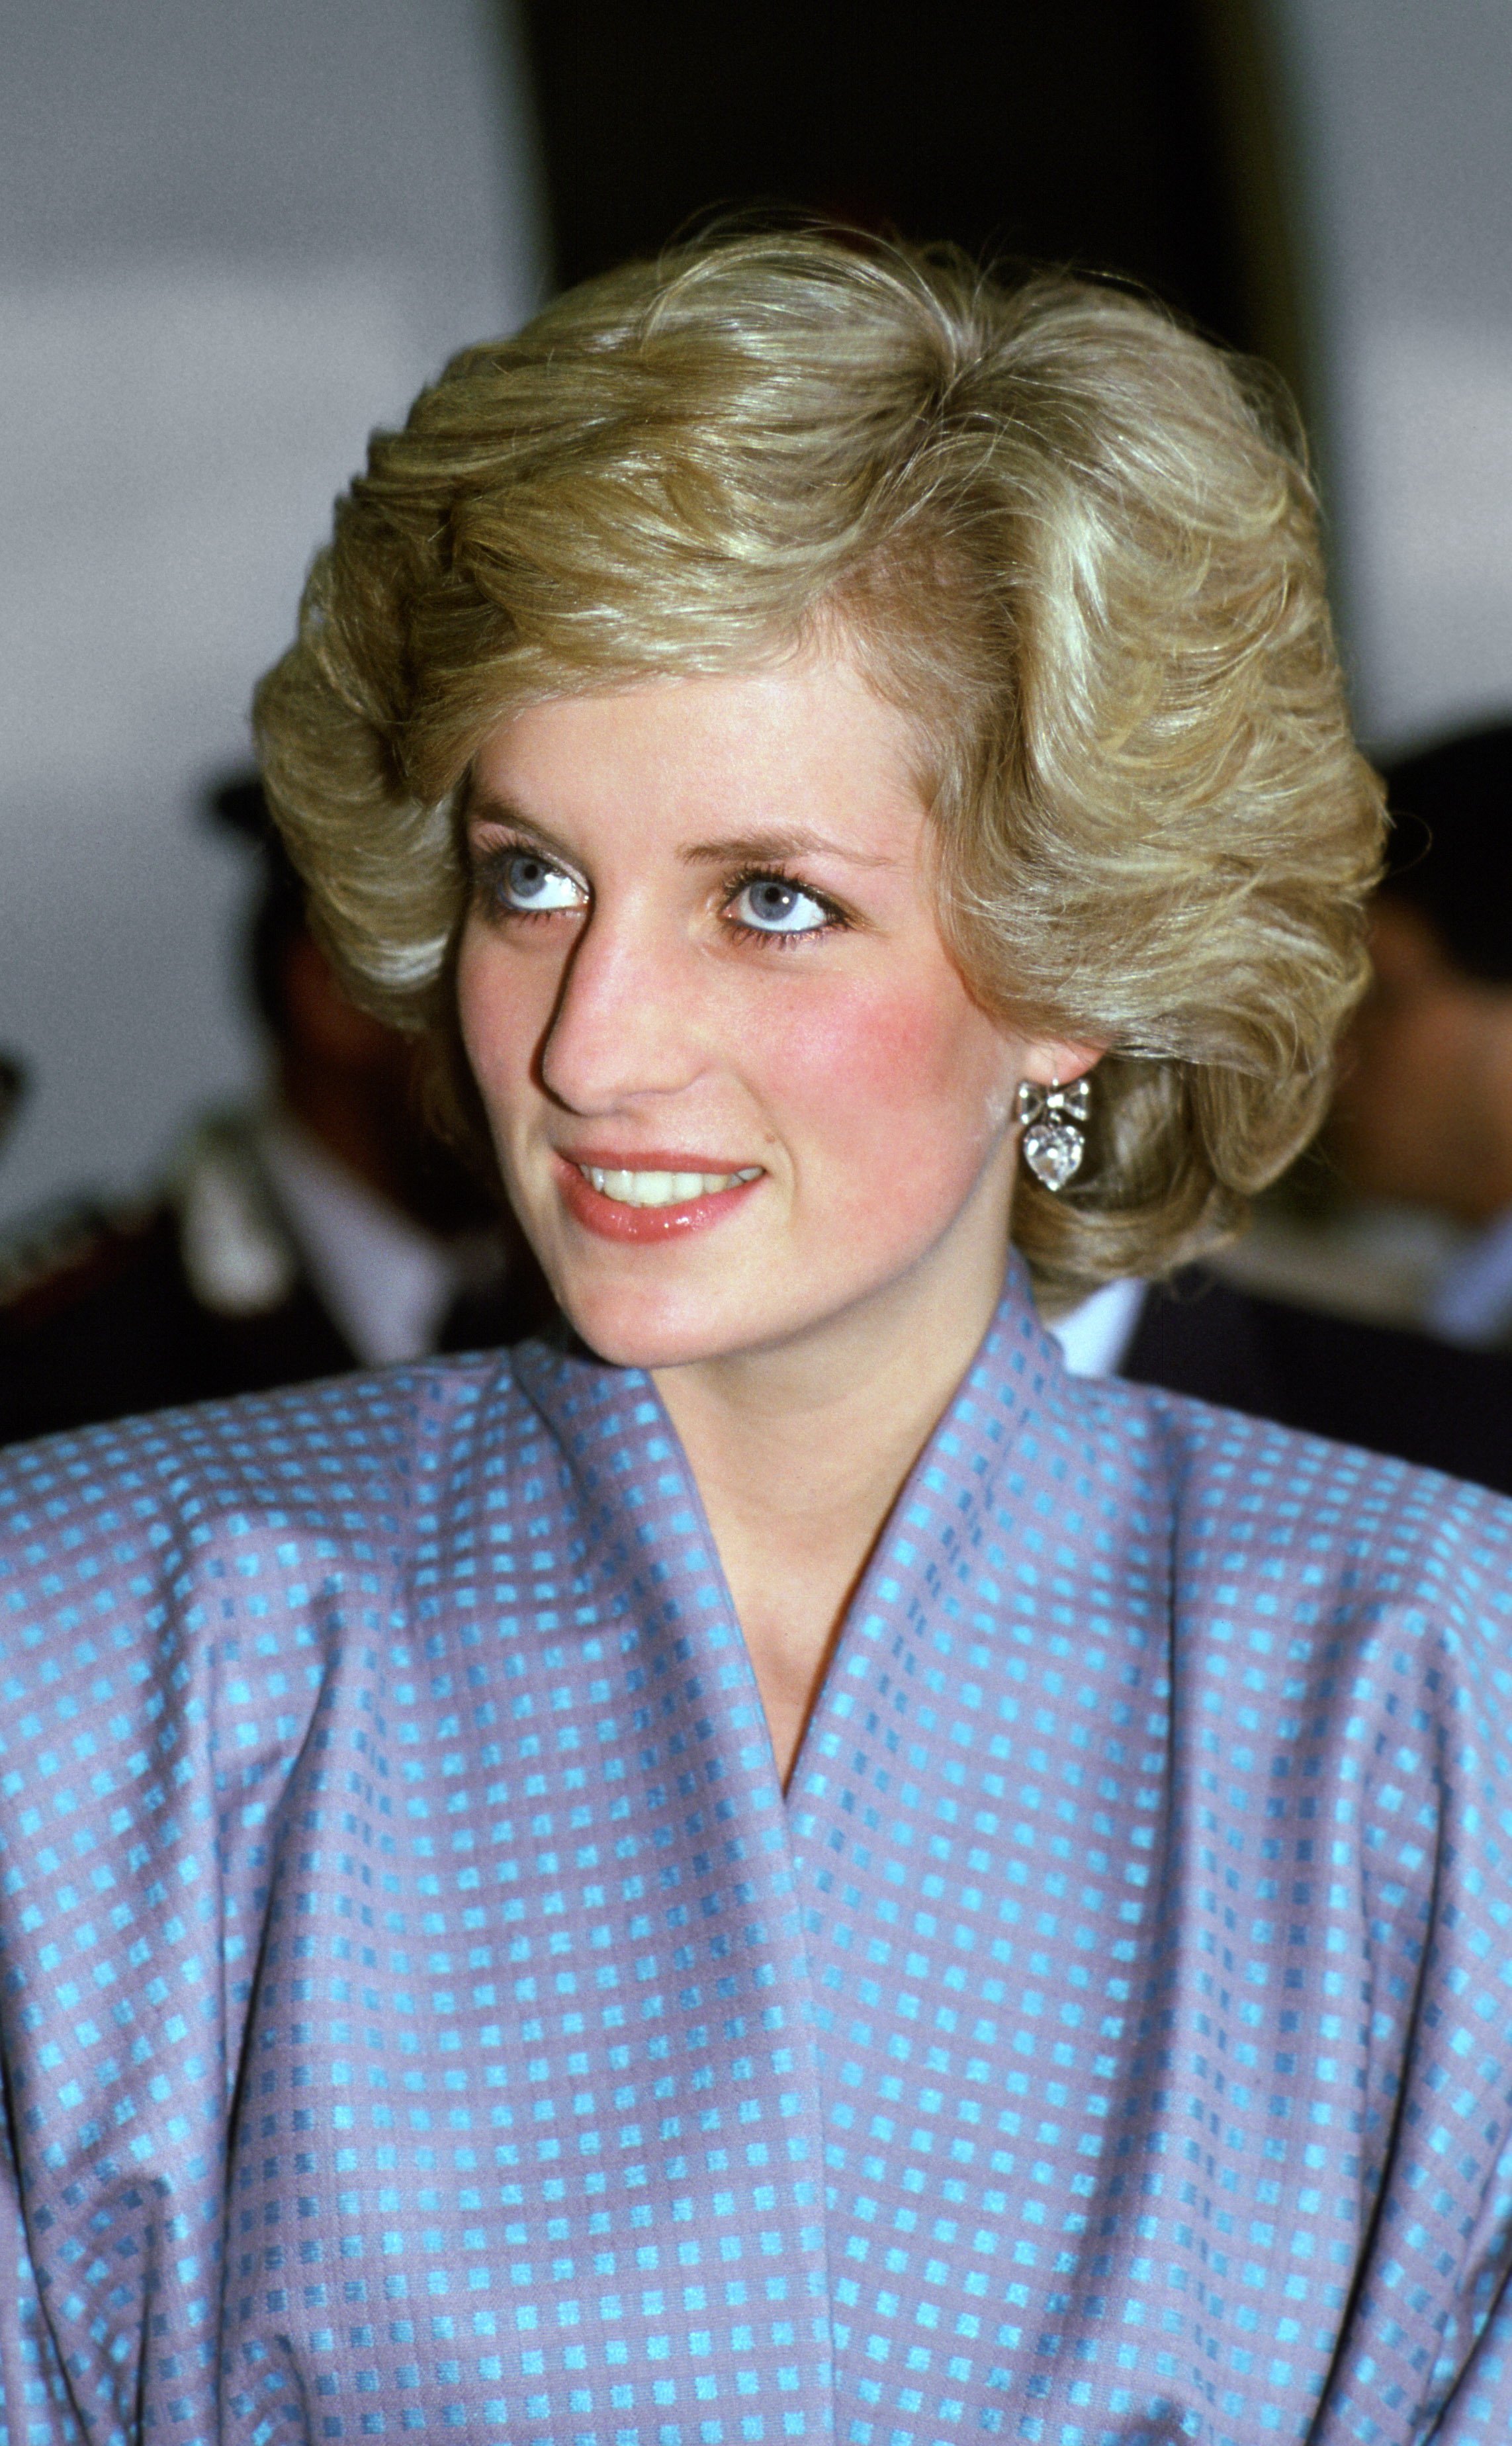 Princess Diana pictured wearing a blue suit during a visit to Millan, Italy ┃Source: Getty Images